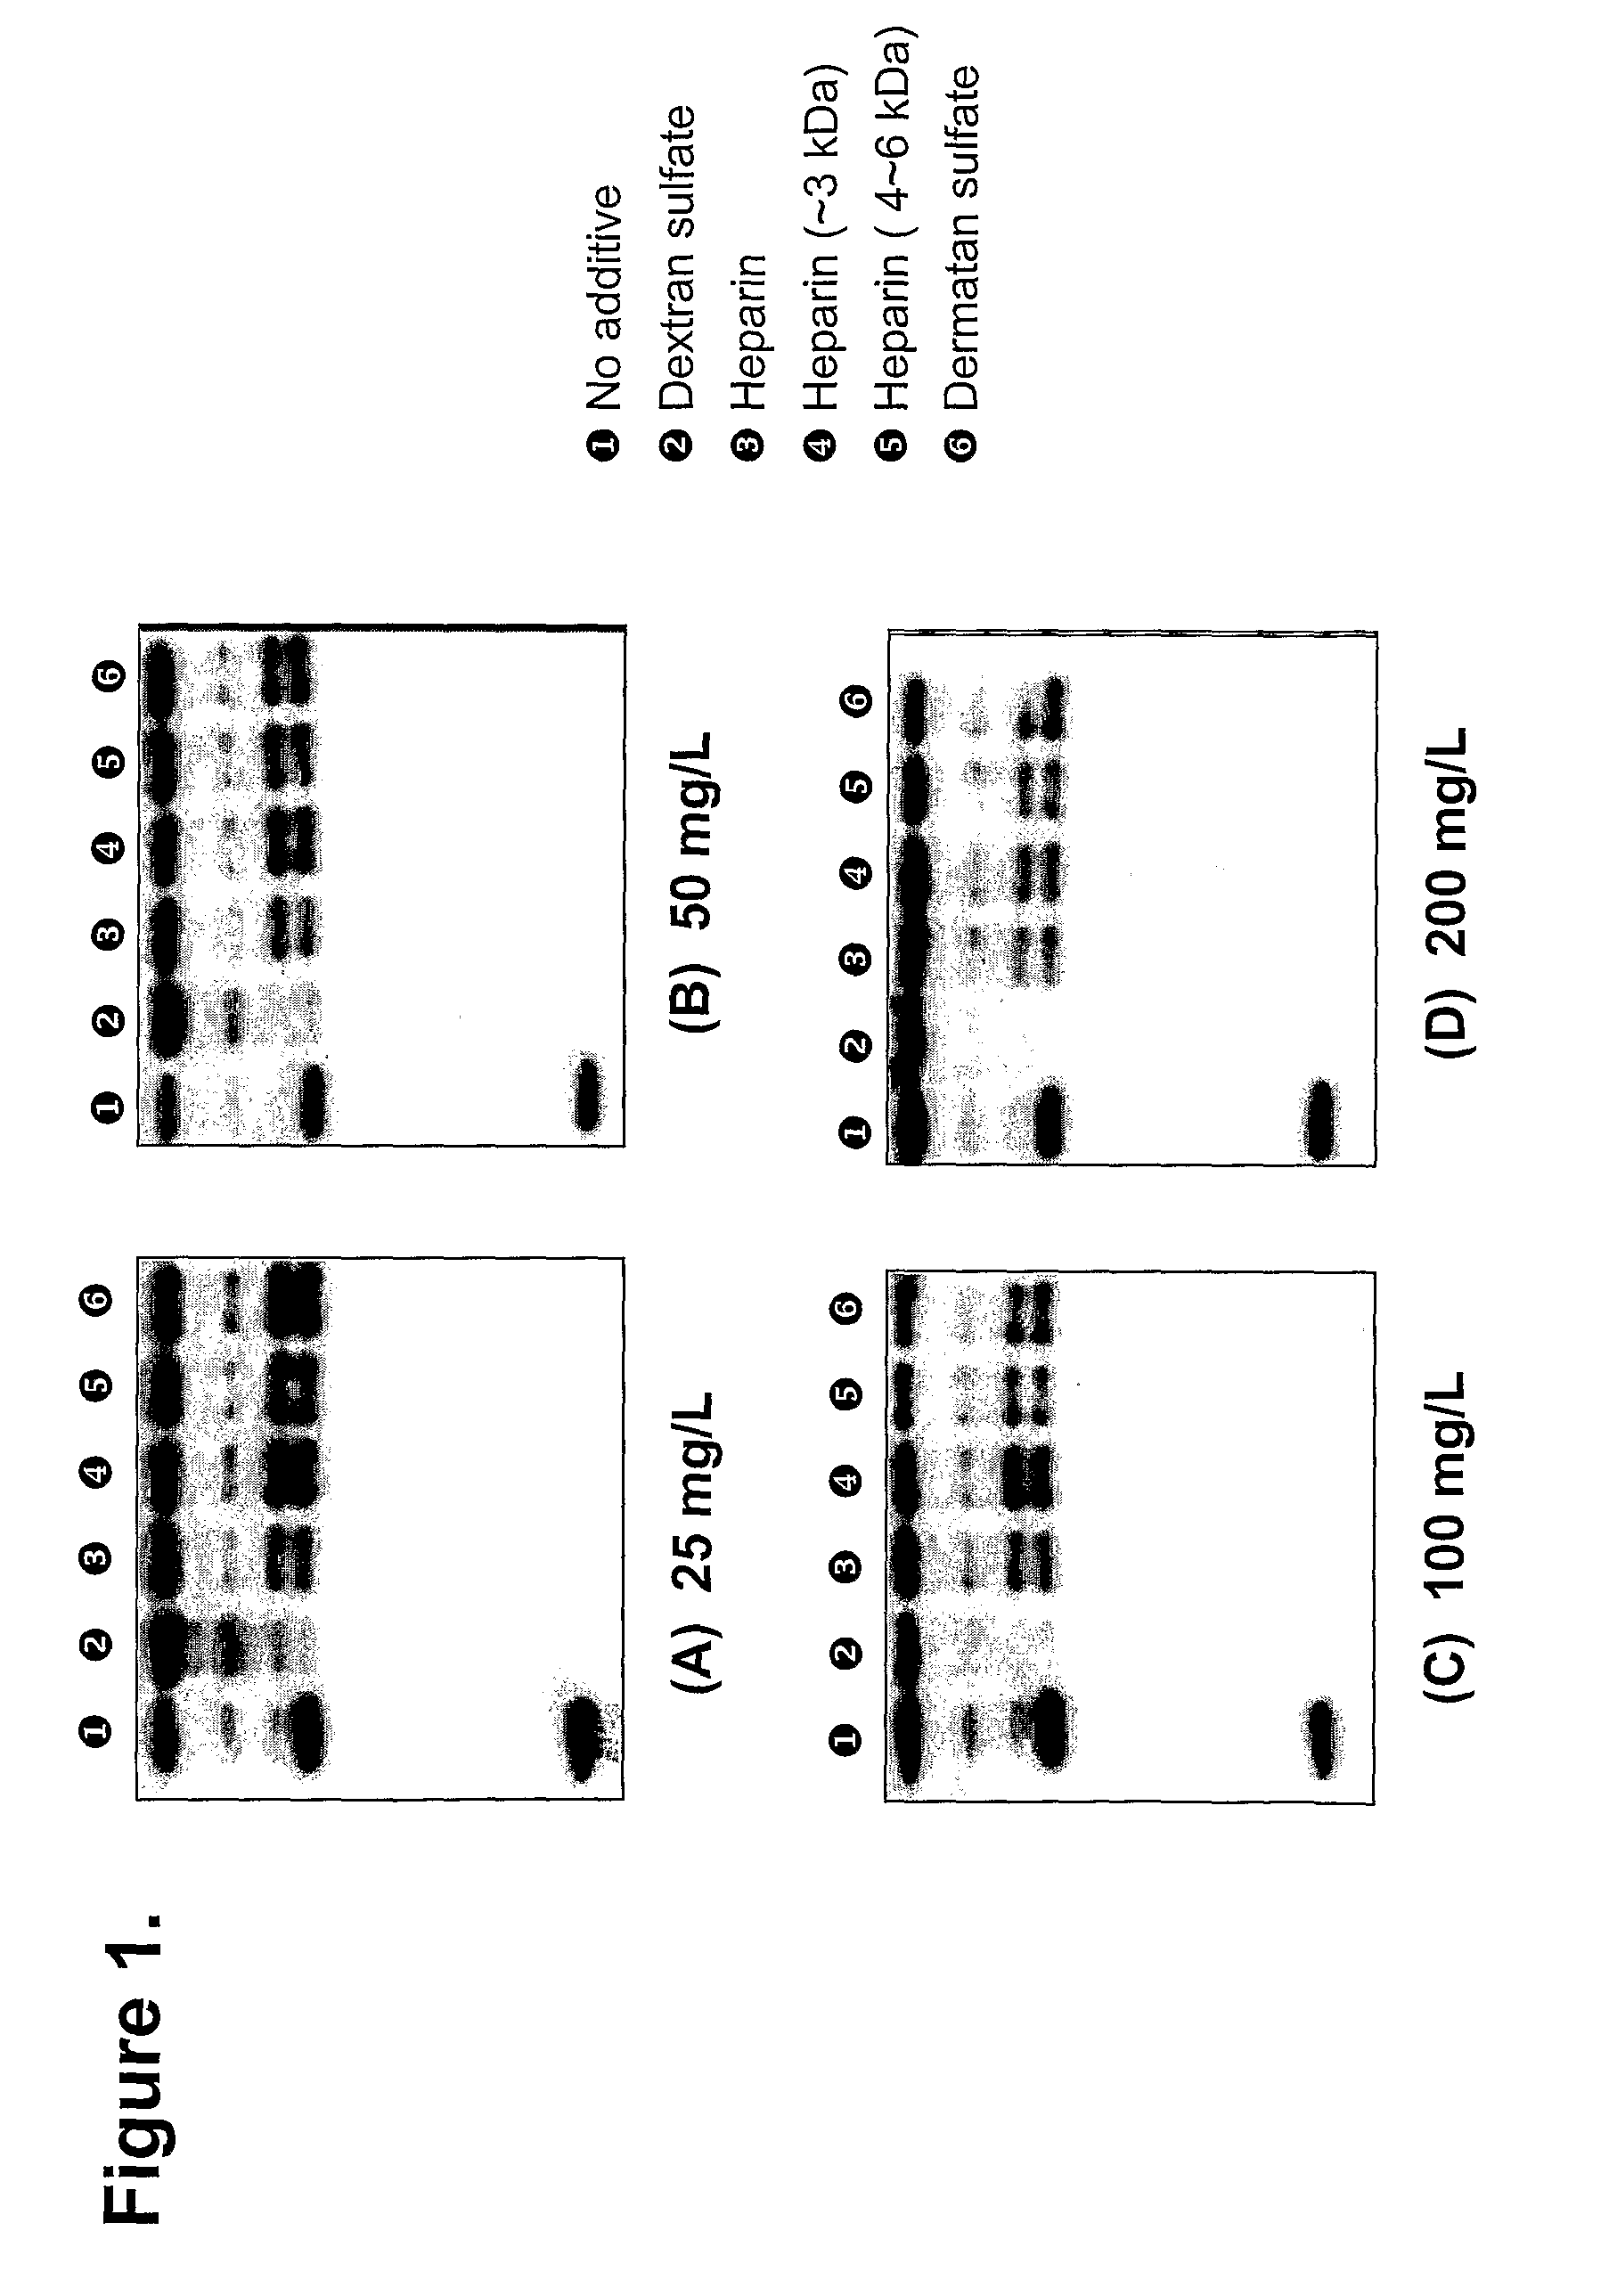 Process for producing and purifying factor VIII and its derivatives